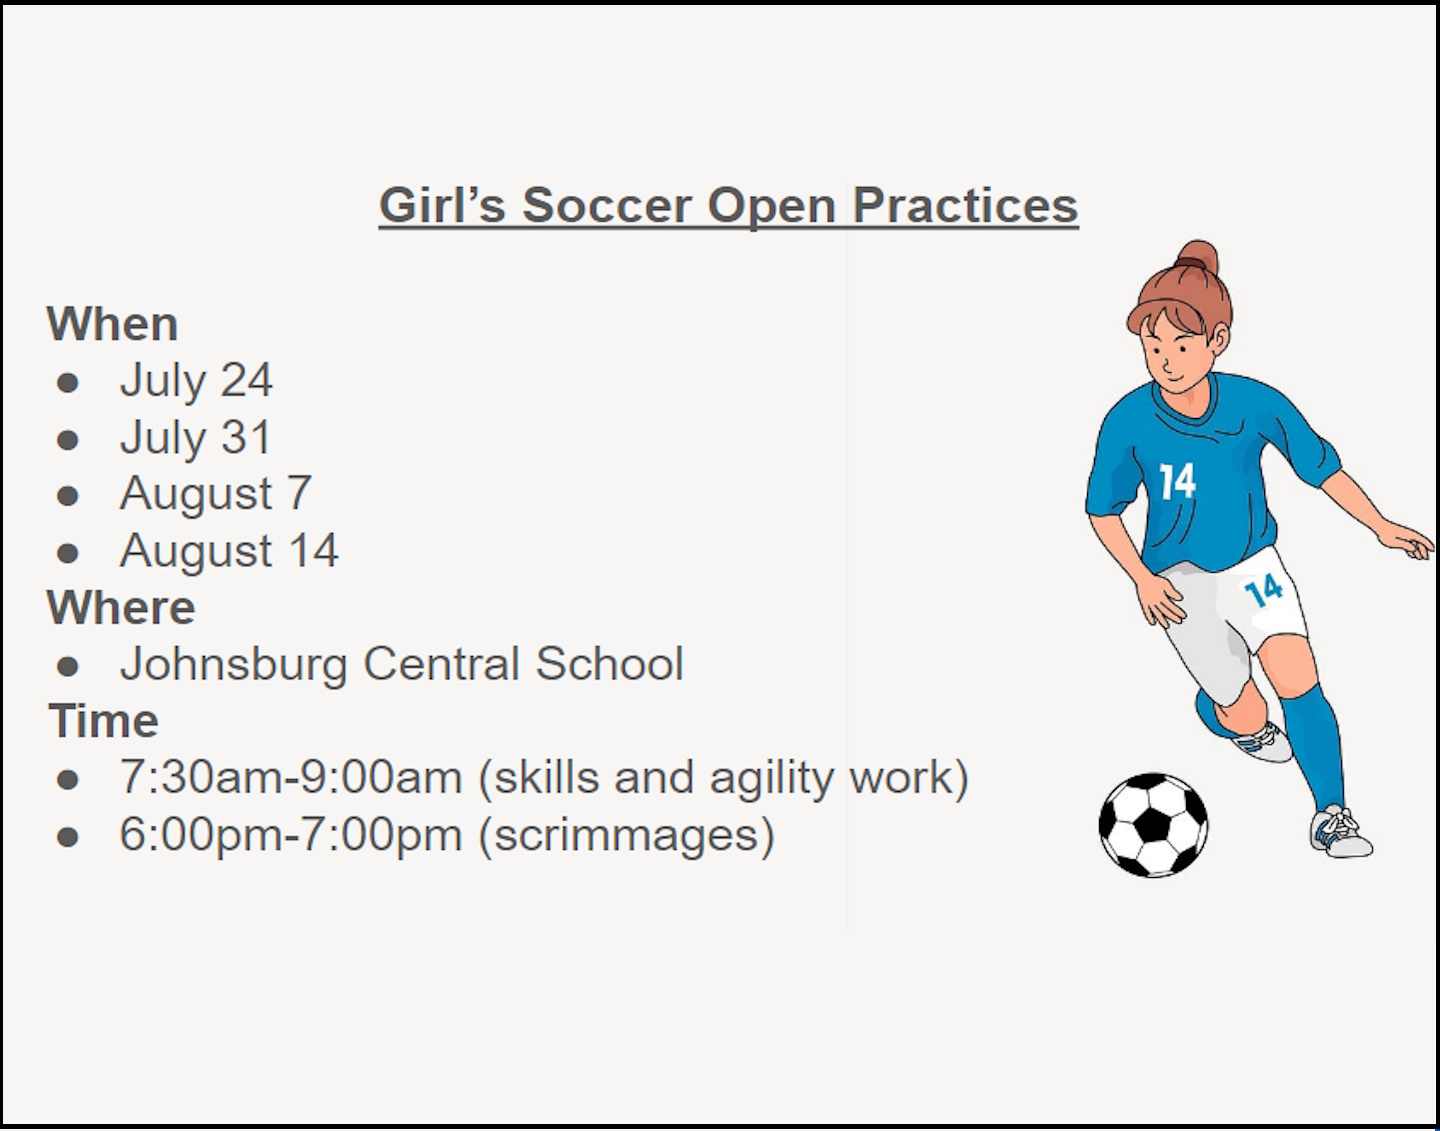 Girls Soccer Open practices call 518 251 2657 for more information